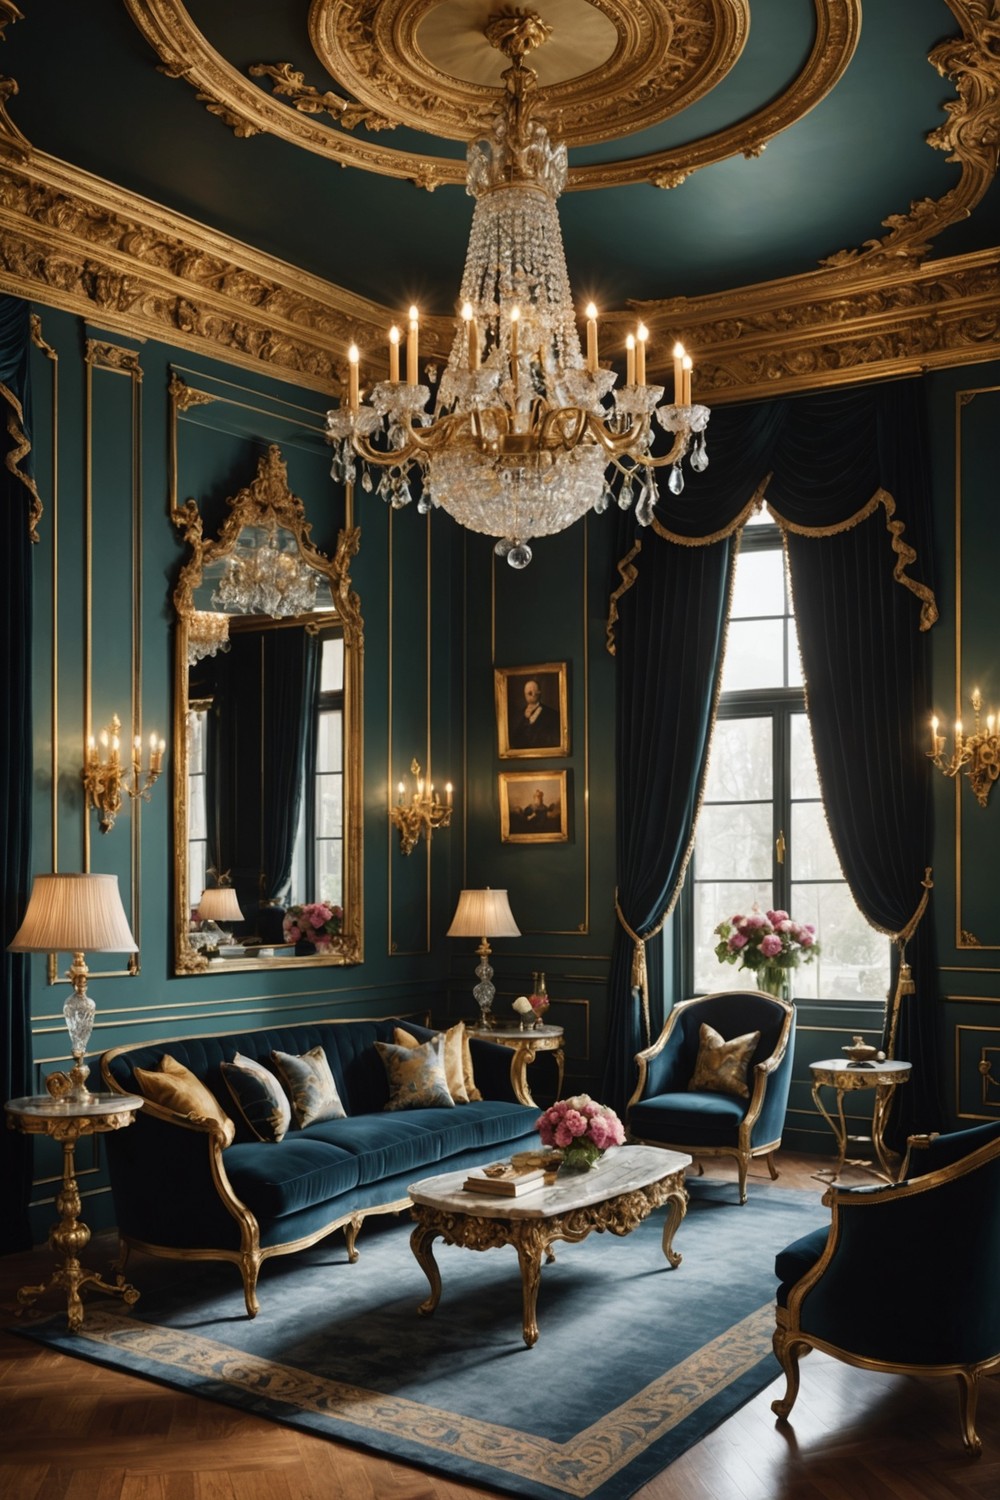 Opulent Lighting: Chandeliers and Sconces Fit for a Ball